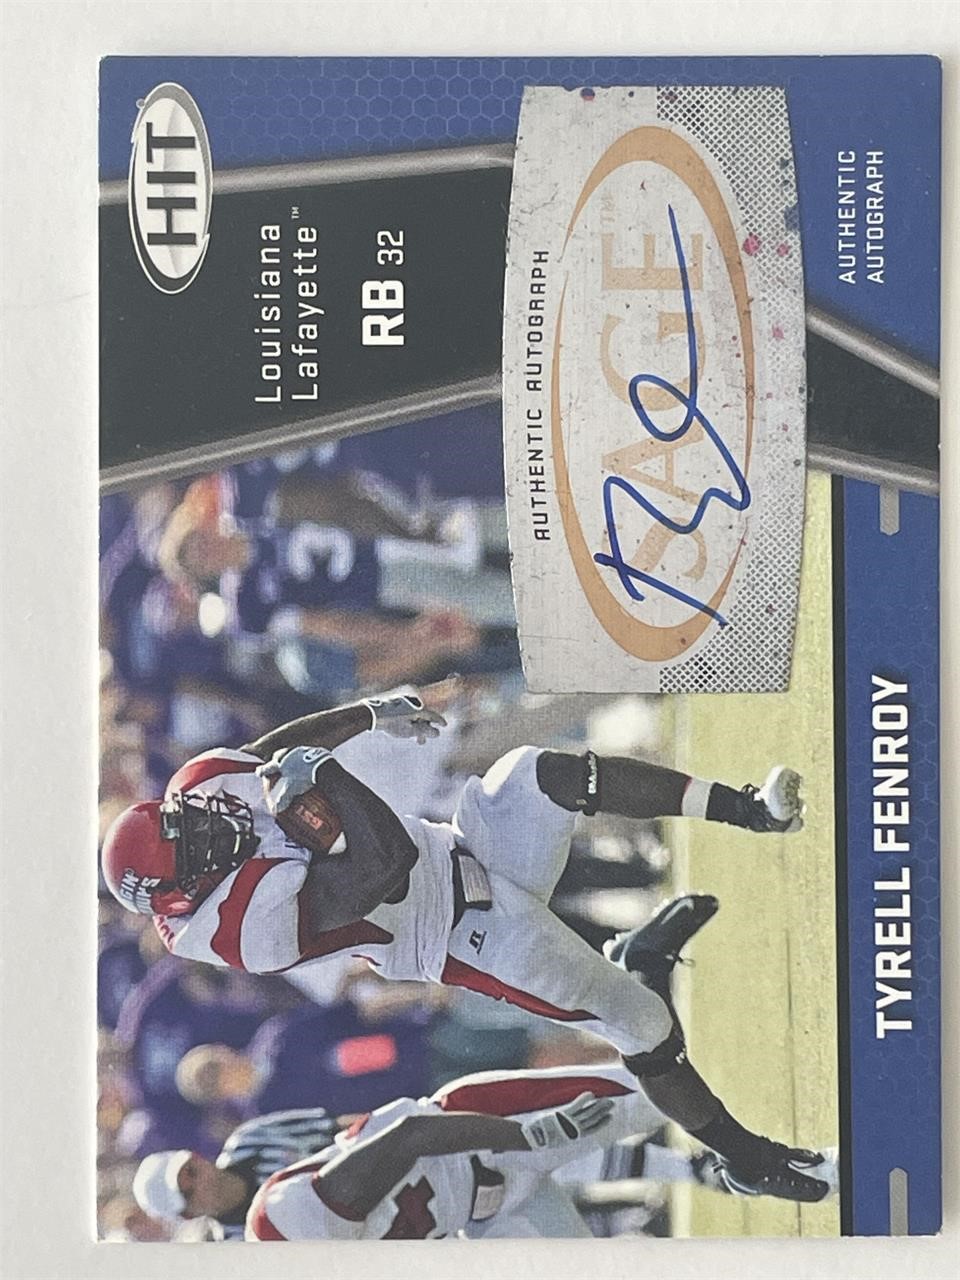 Tyrell Fenroy signed autograph card